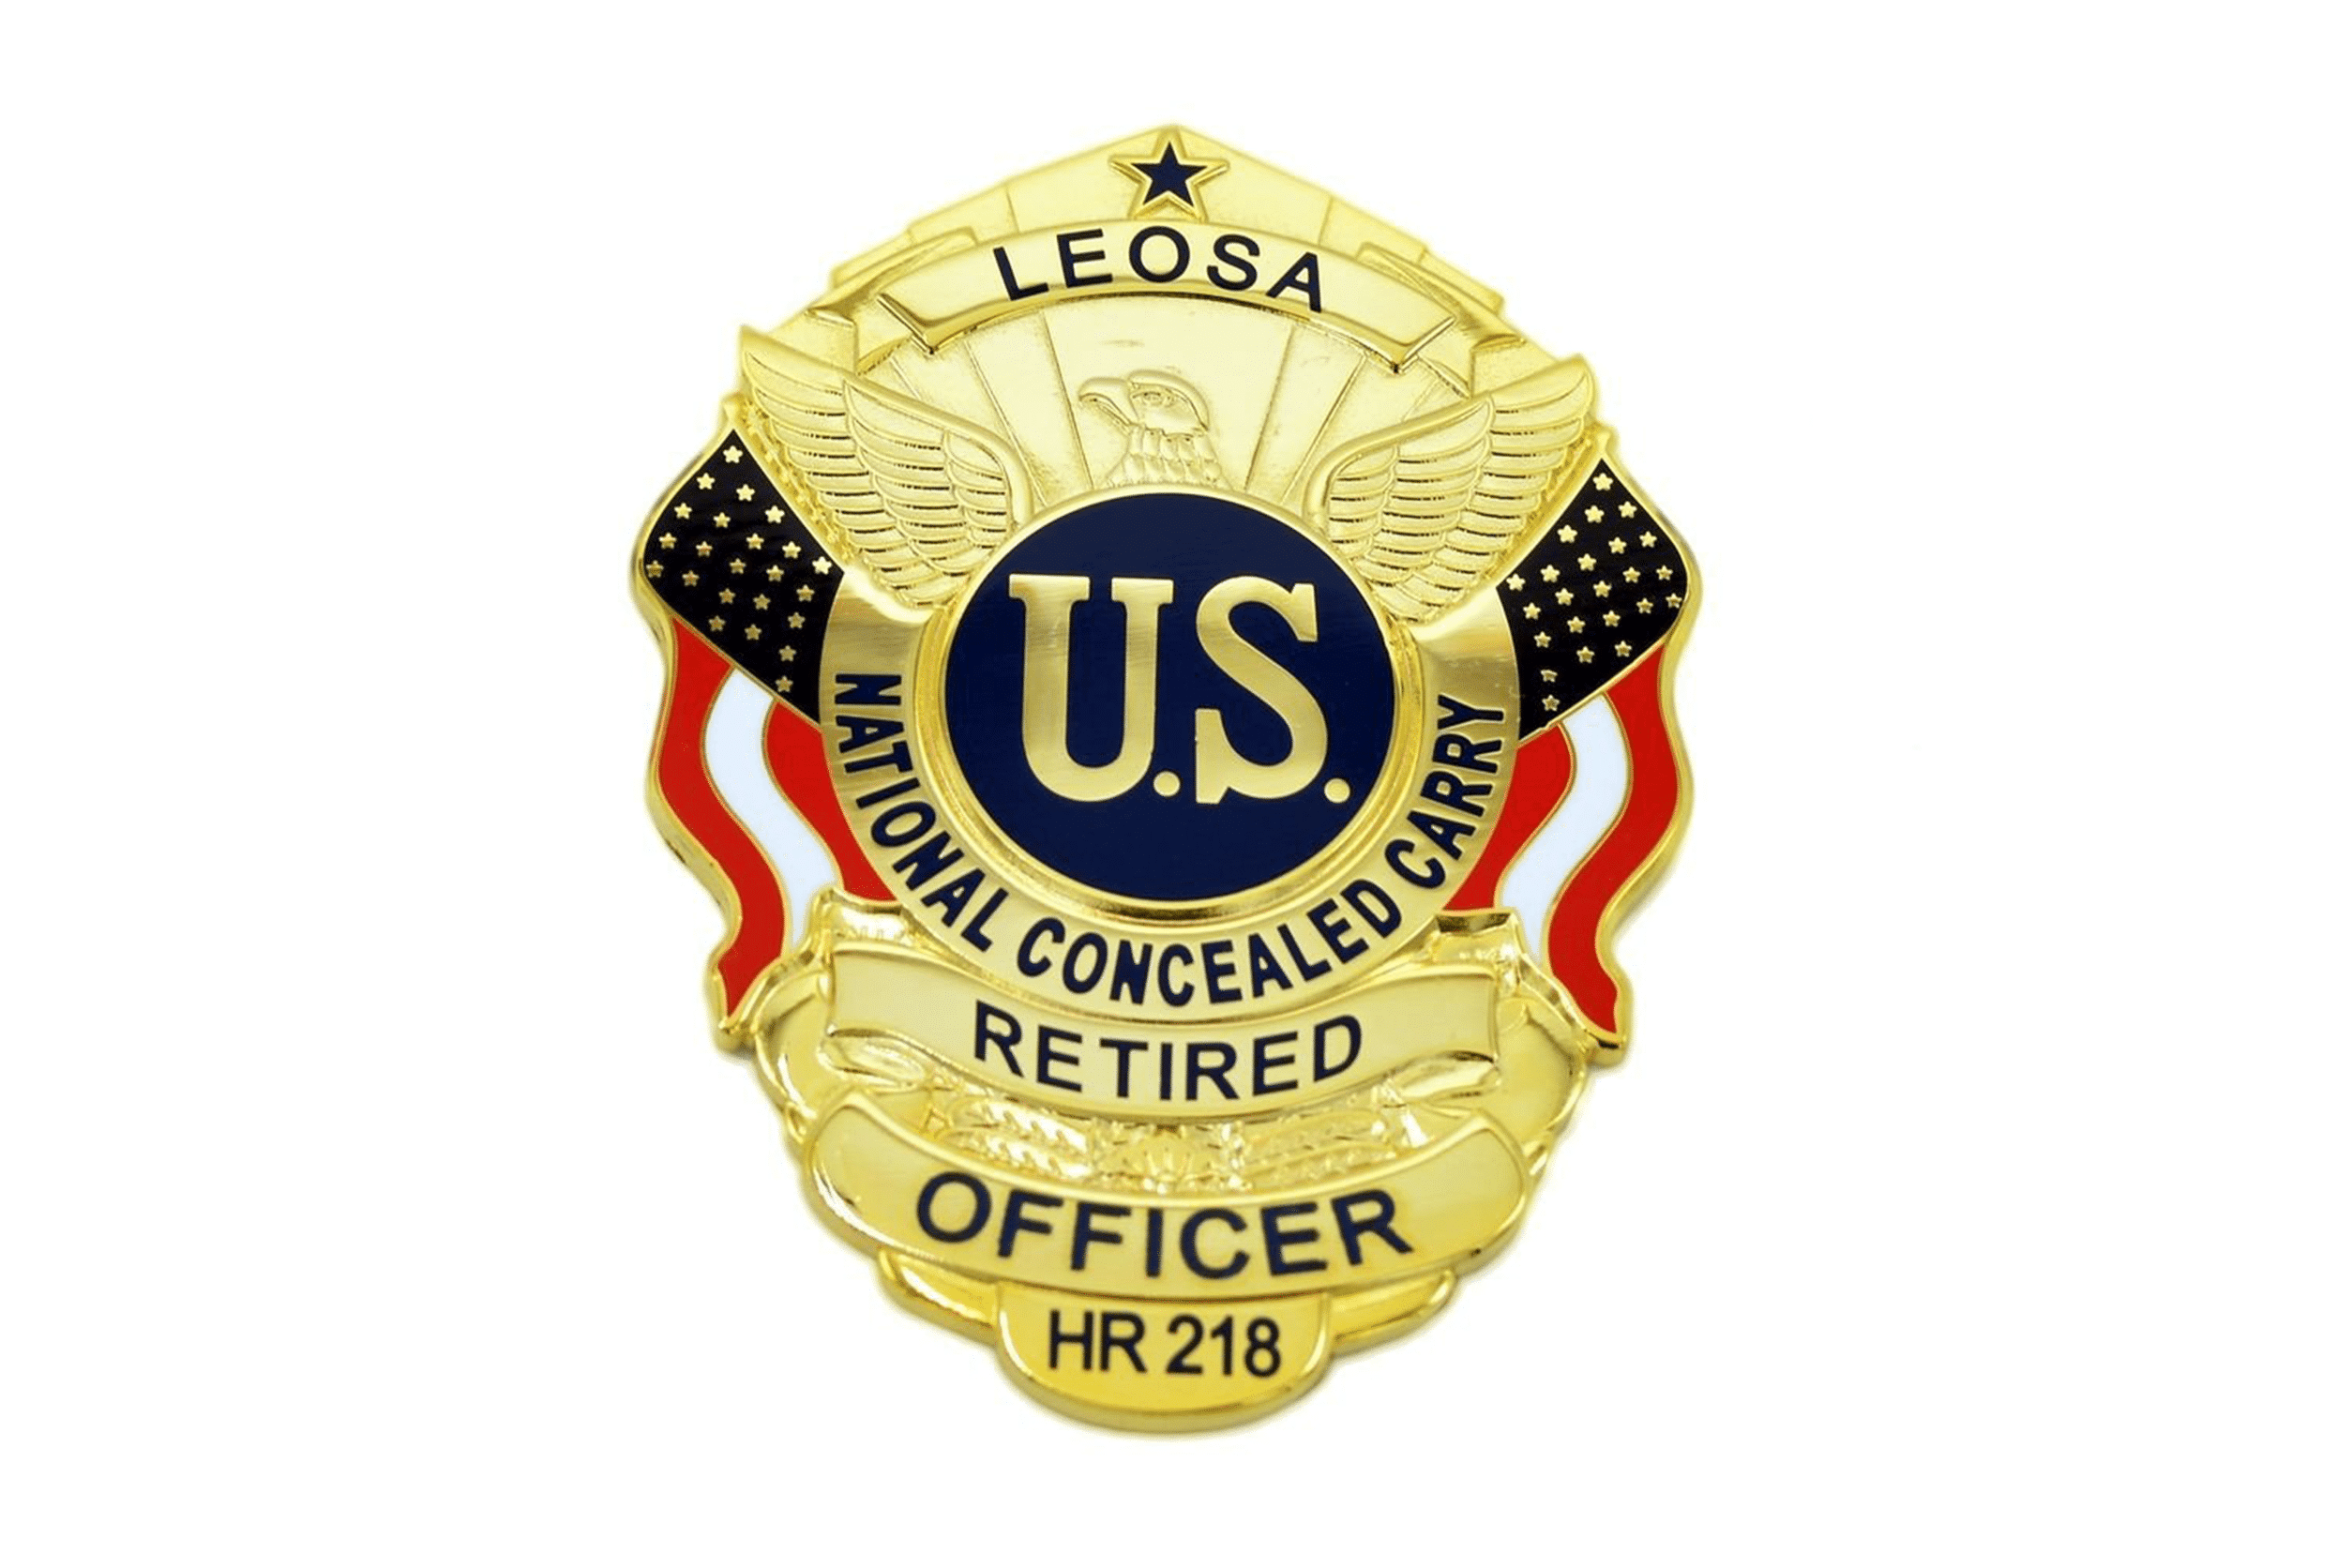 Get LEOSA qualifications on March 9, 8:00 am - 11:00 am for $90. Call (860) 800.2011 to register. Don't miss out!